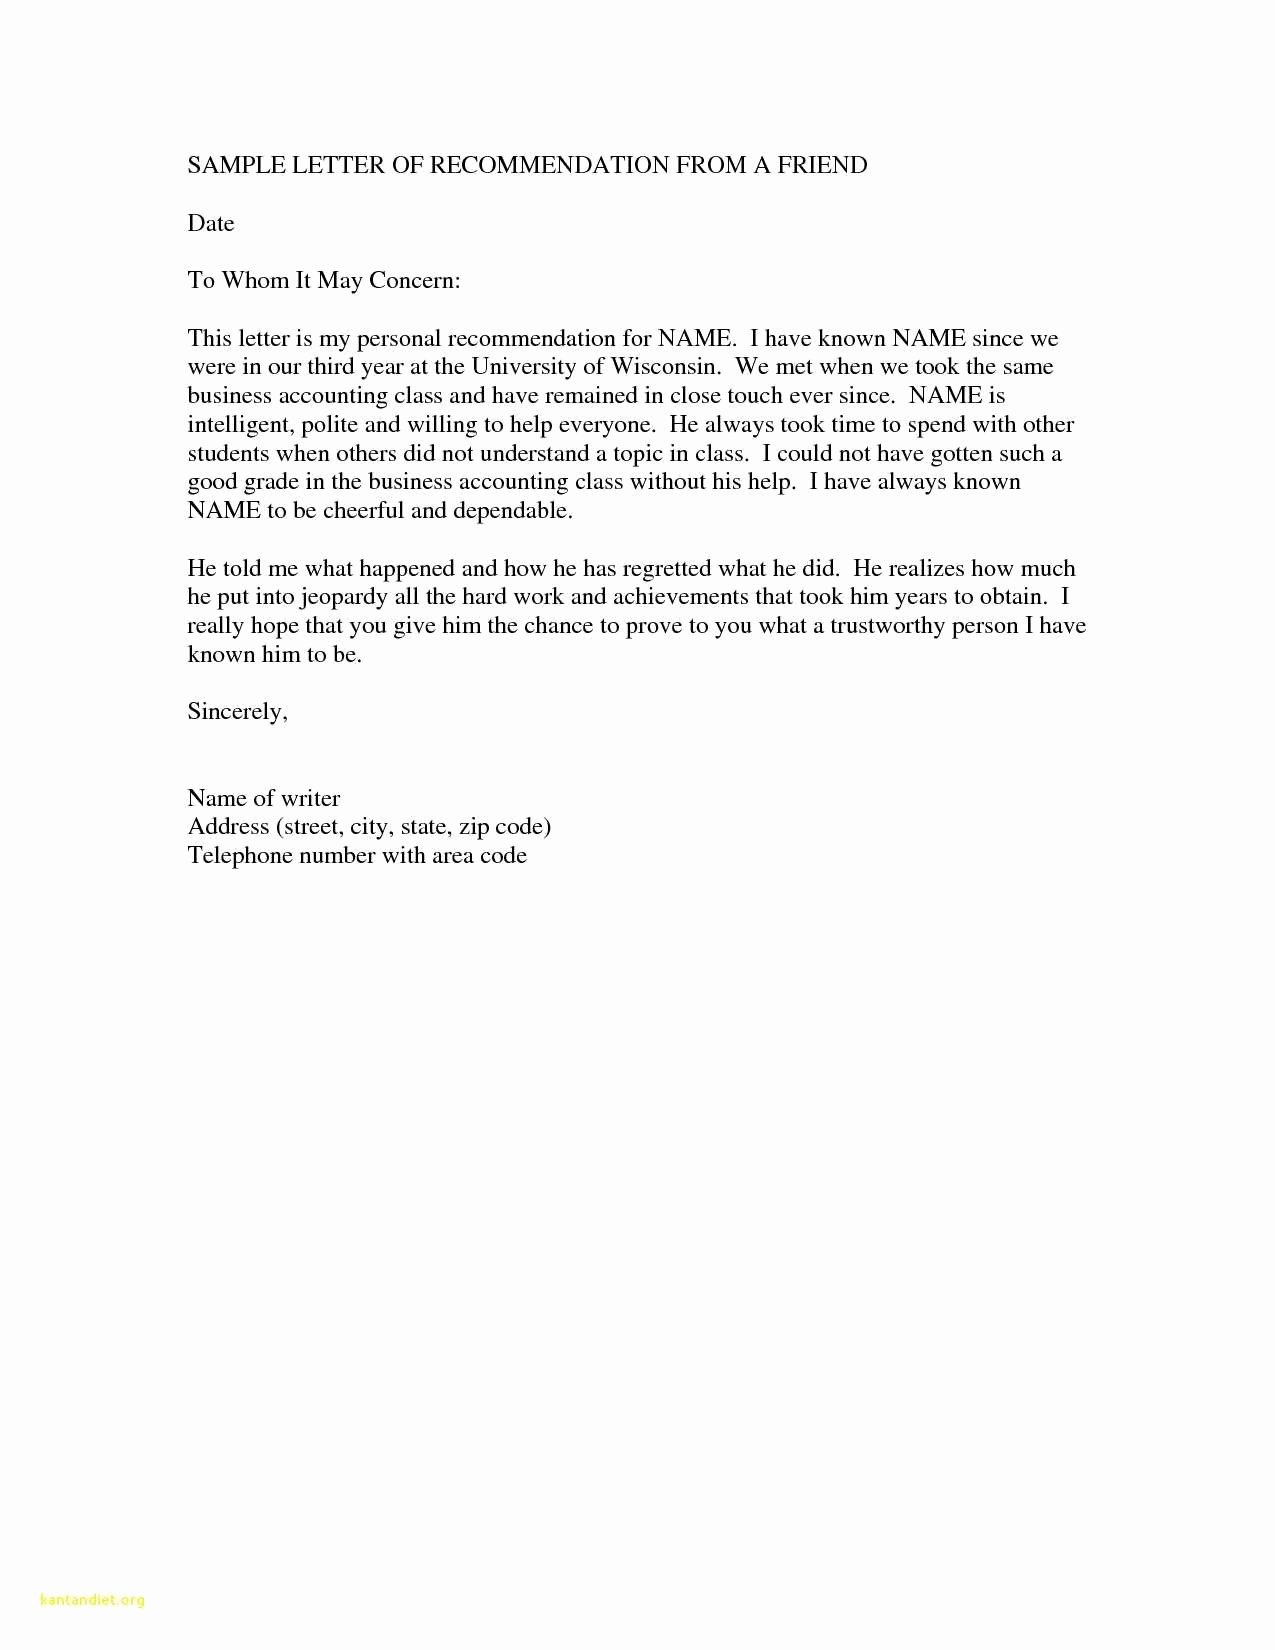 Immigration Recommendation Letter Template Beautiful 2 3 Letter From Friend for Immigration